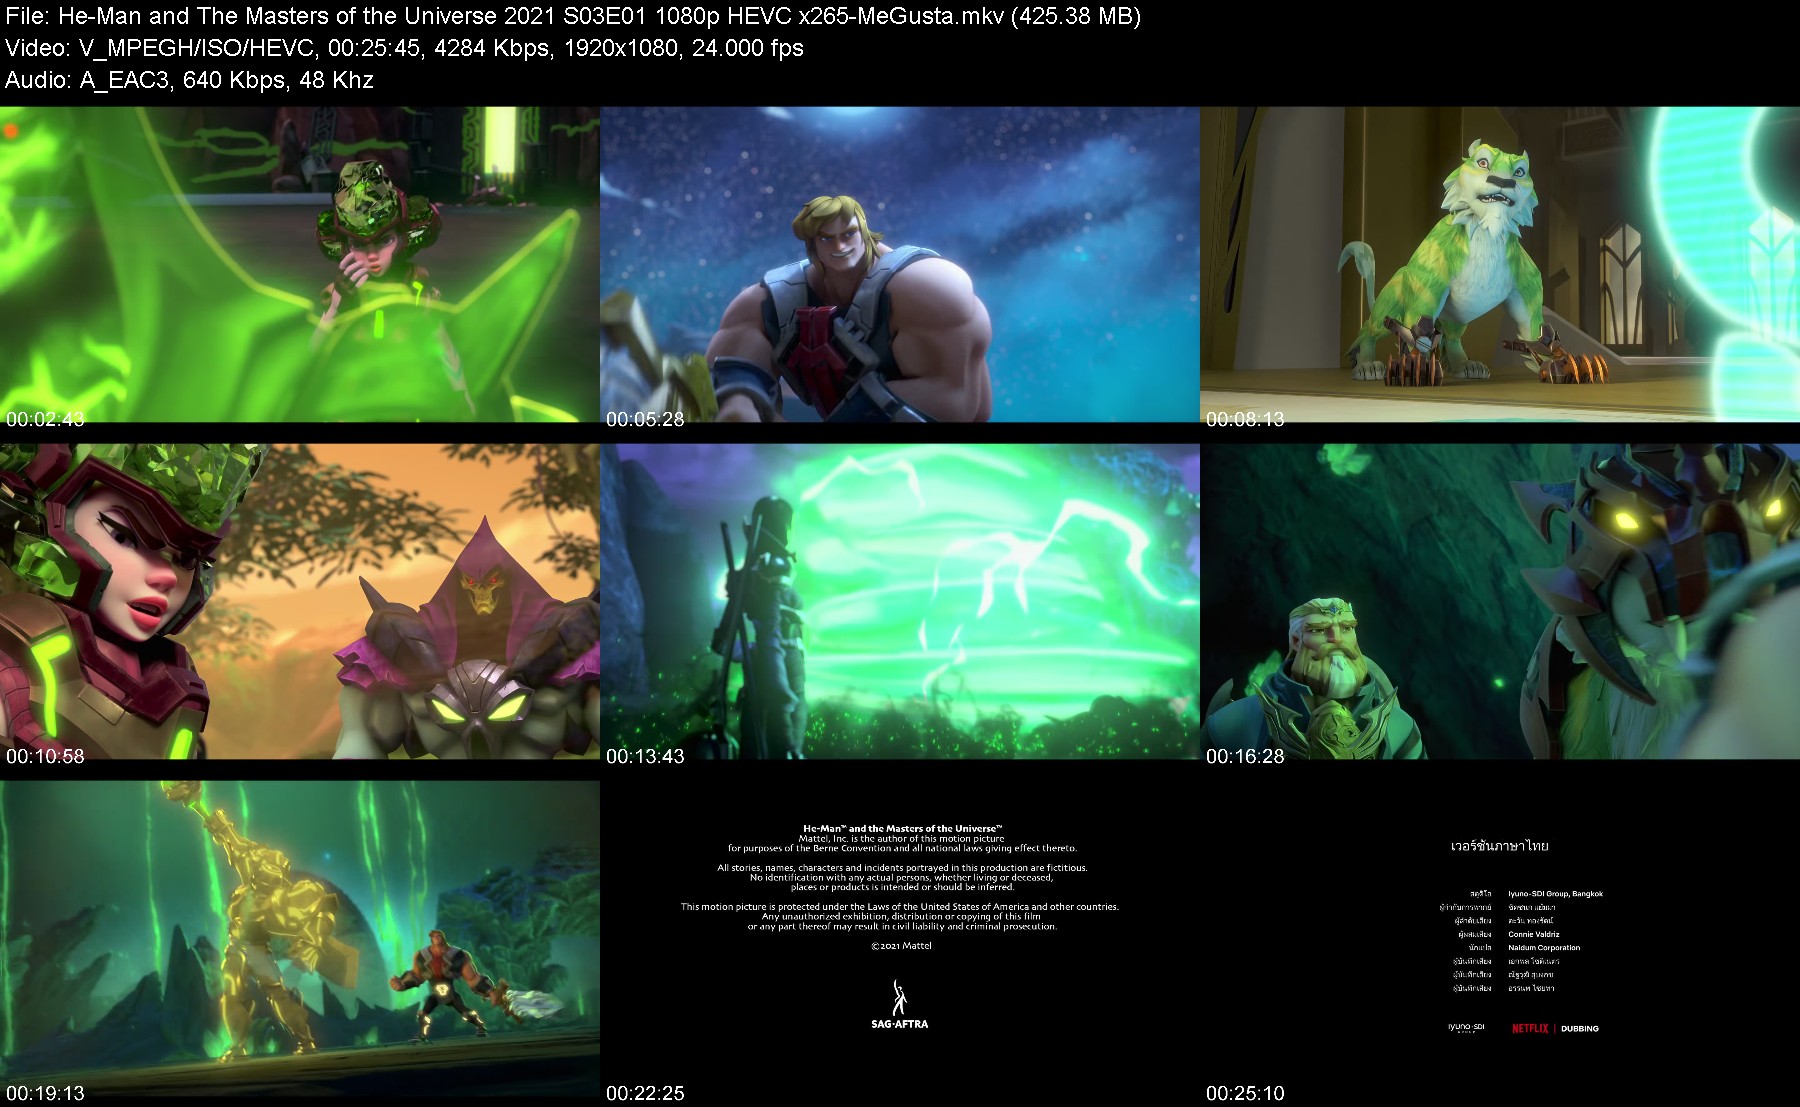 300814791_he-man-and-the-masters-of-the-universe-2021-s03e01-1080p-hevc-x265-megusta.jpg